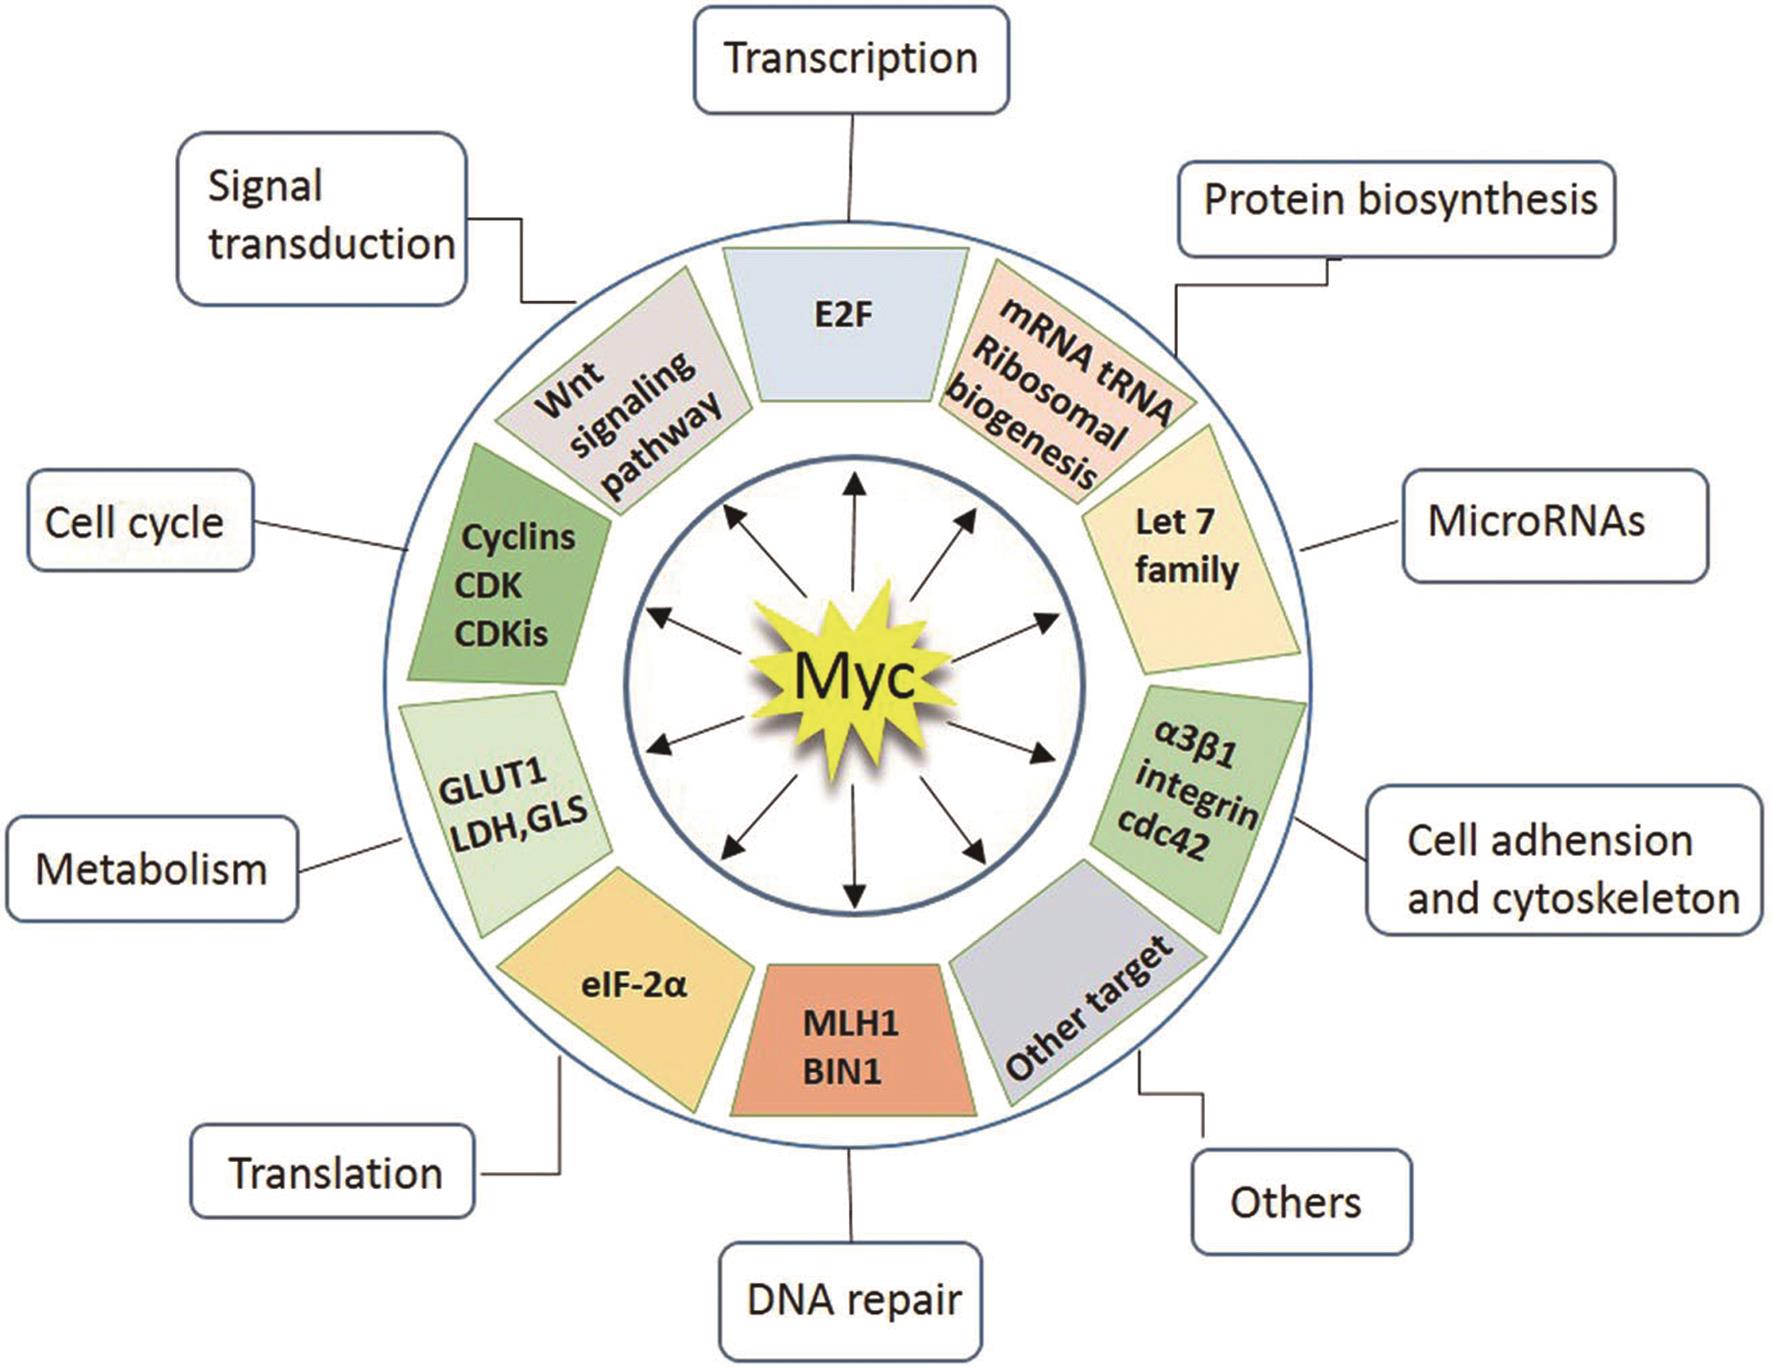 Spectrum of cellular functions regulated by MYC.